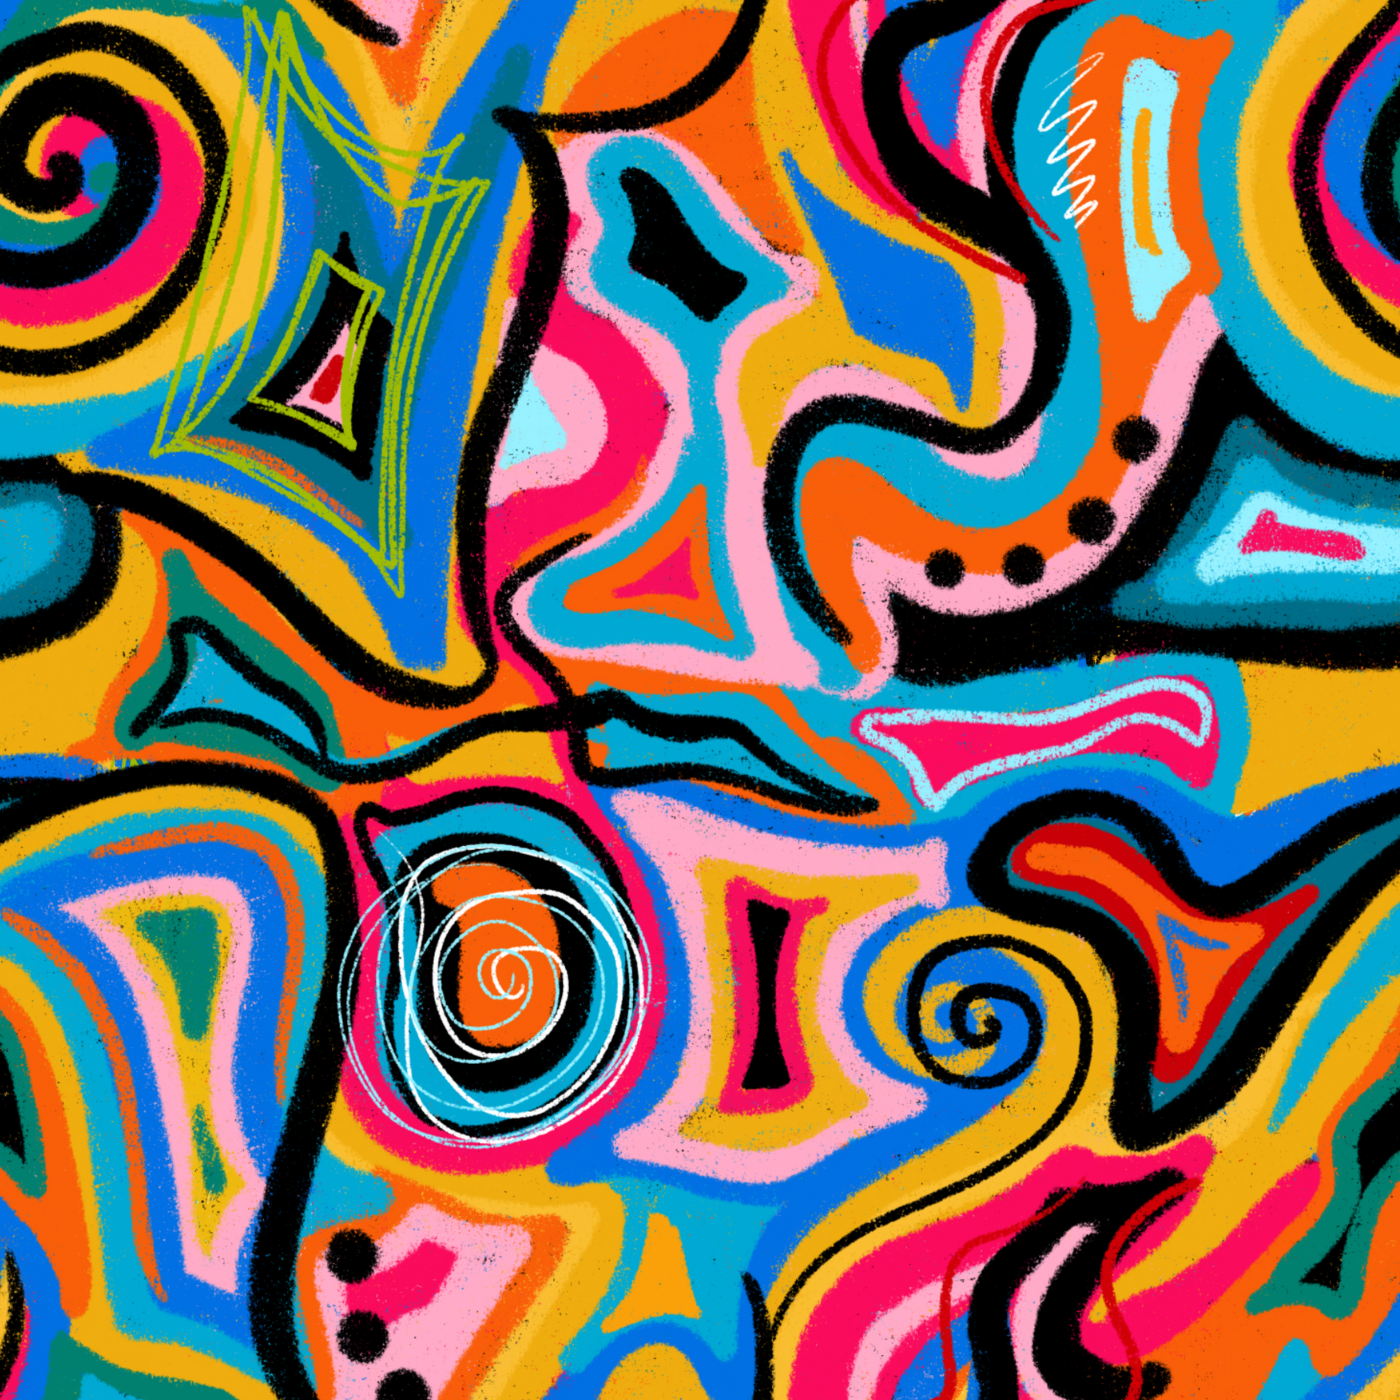 Black, orange, pink, red and teal lines flow in all directions and shapes in this abstract design.